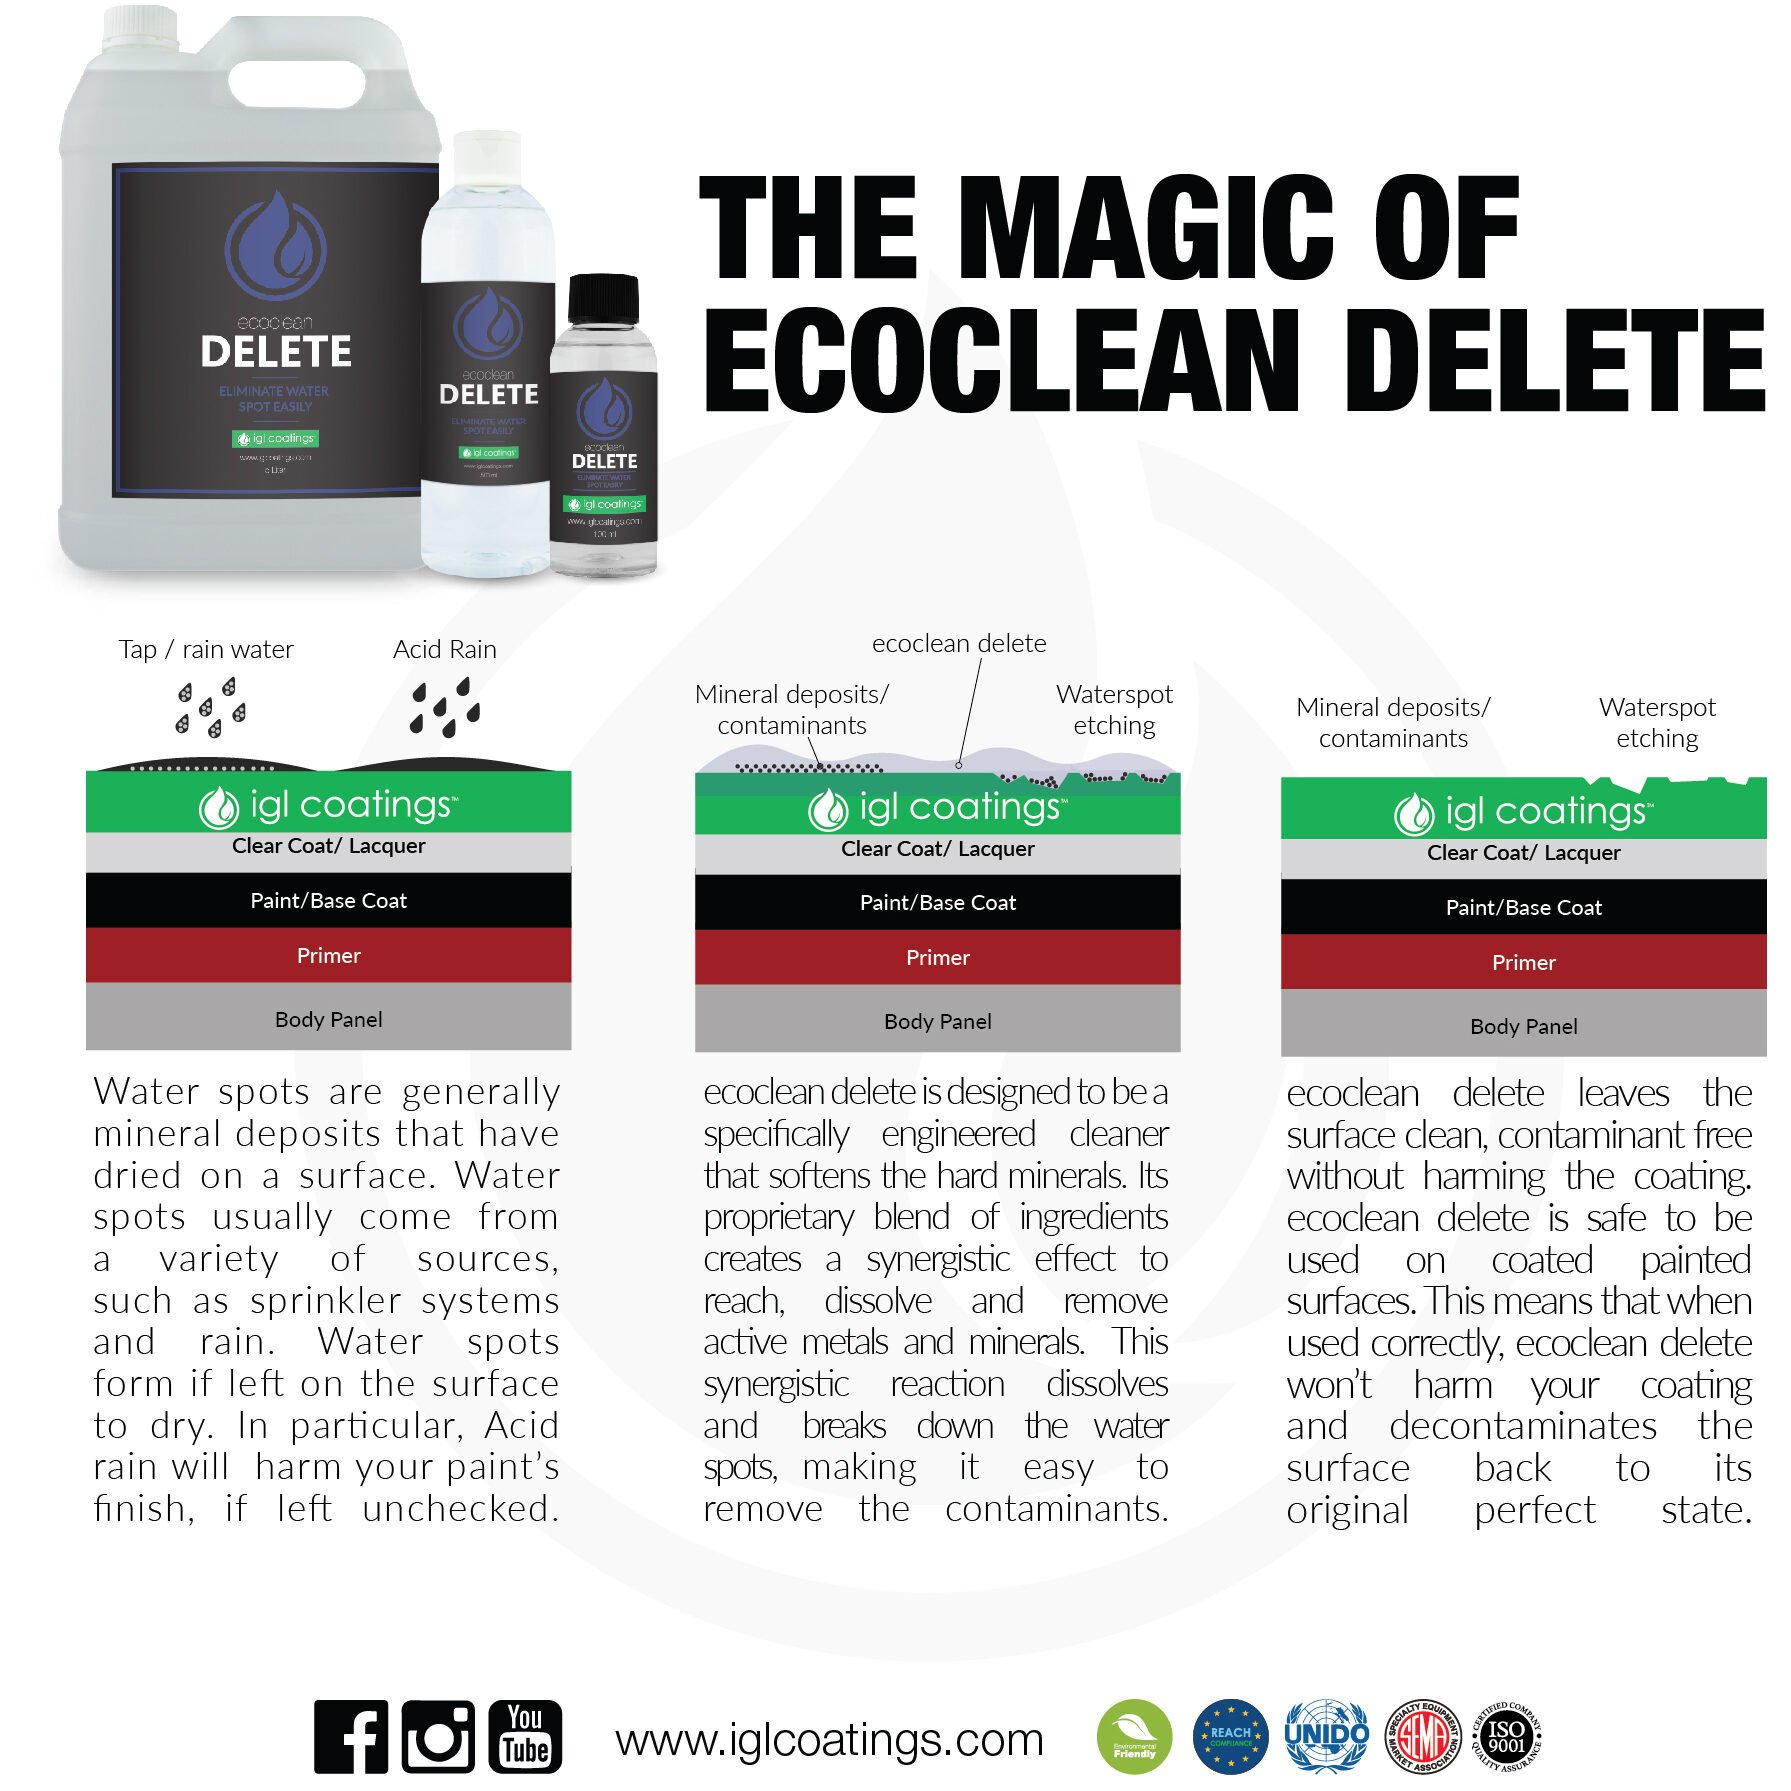 How ecoclean delete works to effectively and safely remove waterspots and mineral deposits (limescale deposits, cement splatter, concrete) without any abrasives